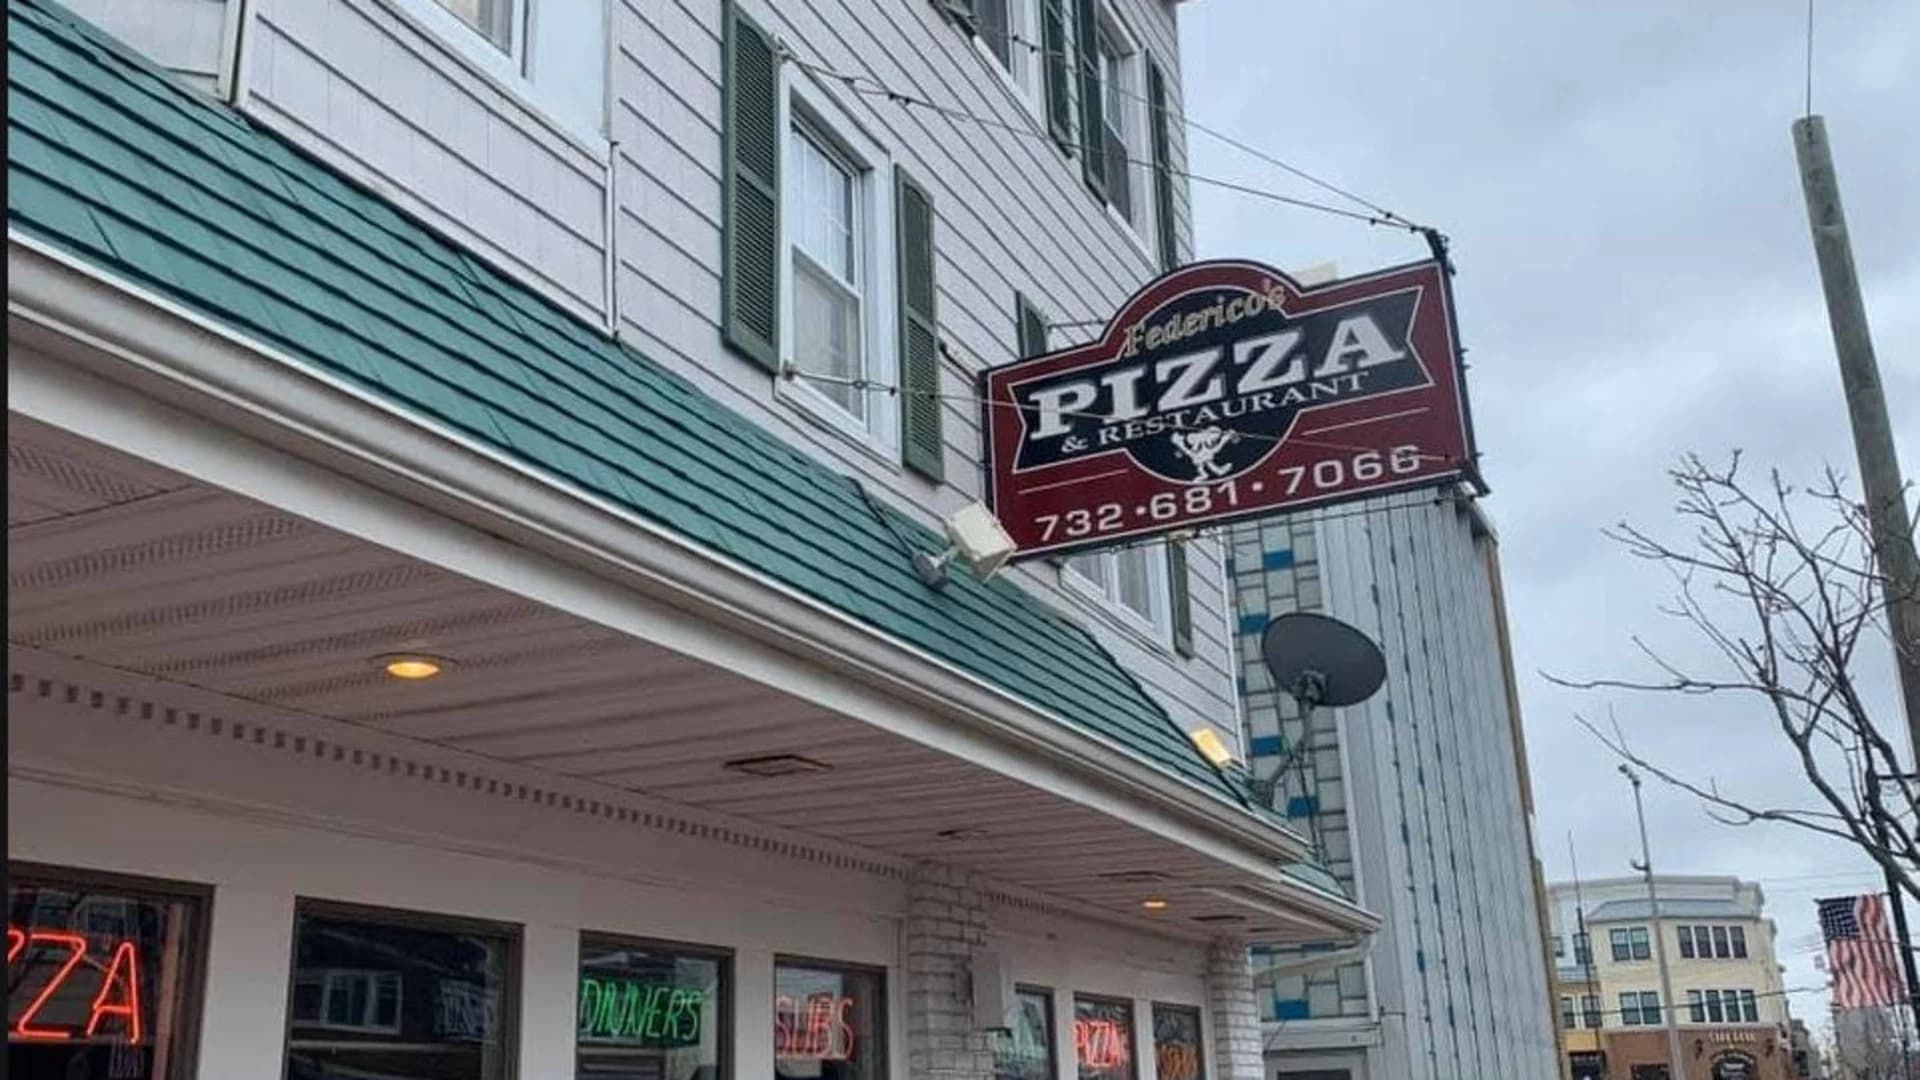 Pizzeria that borrowed heavily to keep its workers temporarily shuts down